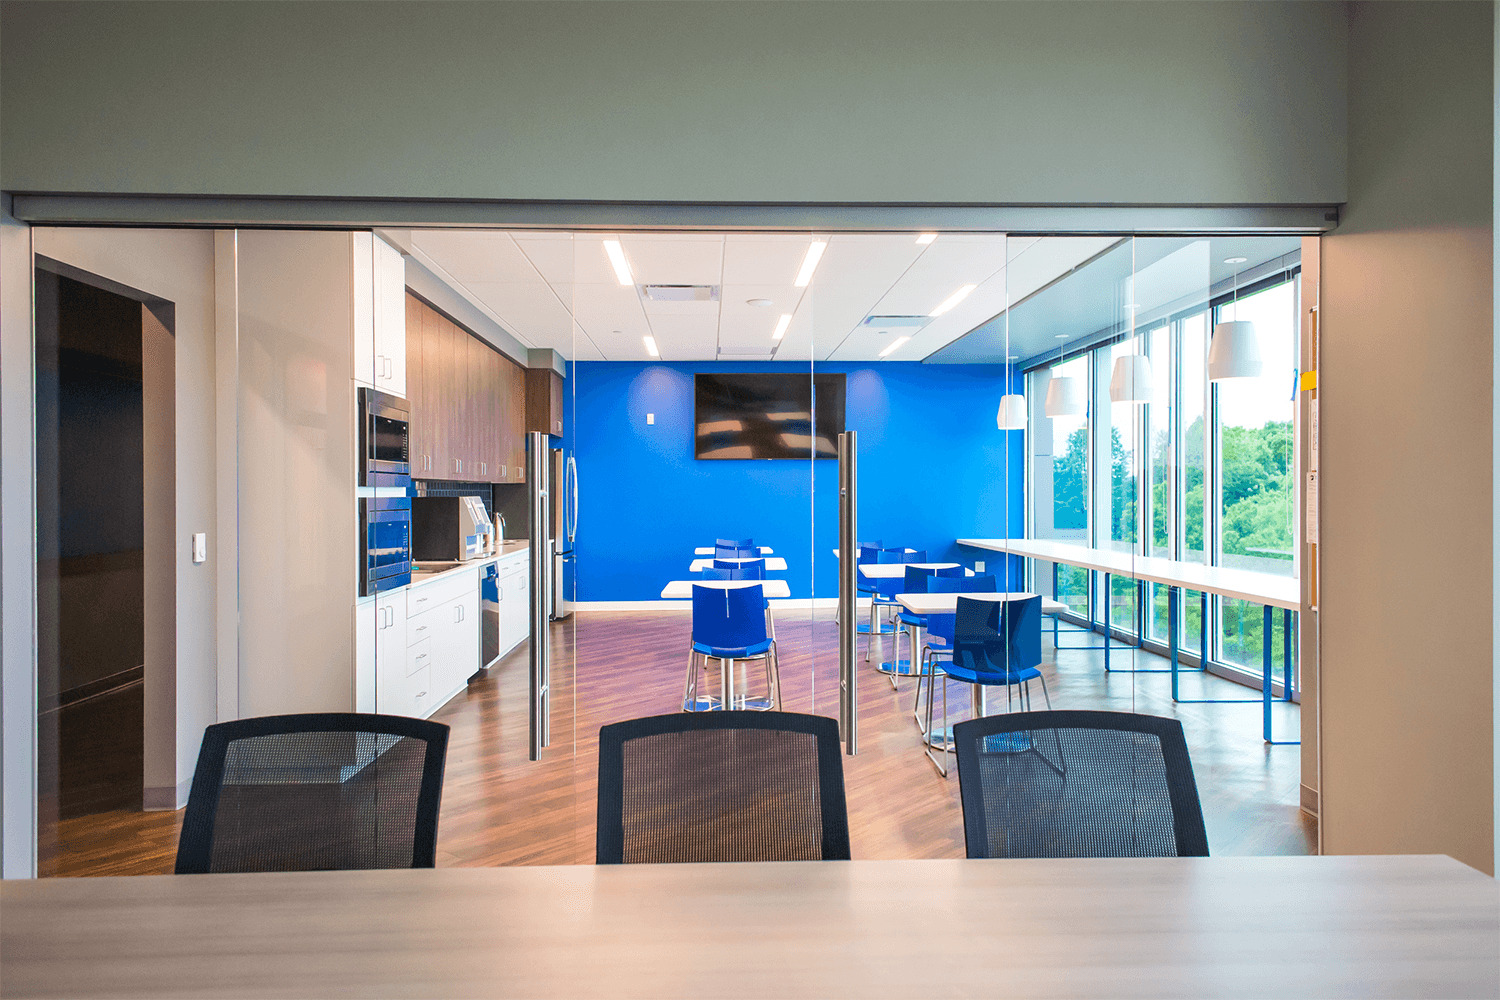 view from conference room into a café/break area with a vibrant blue accent wall